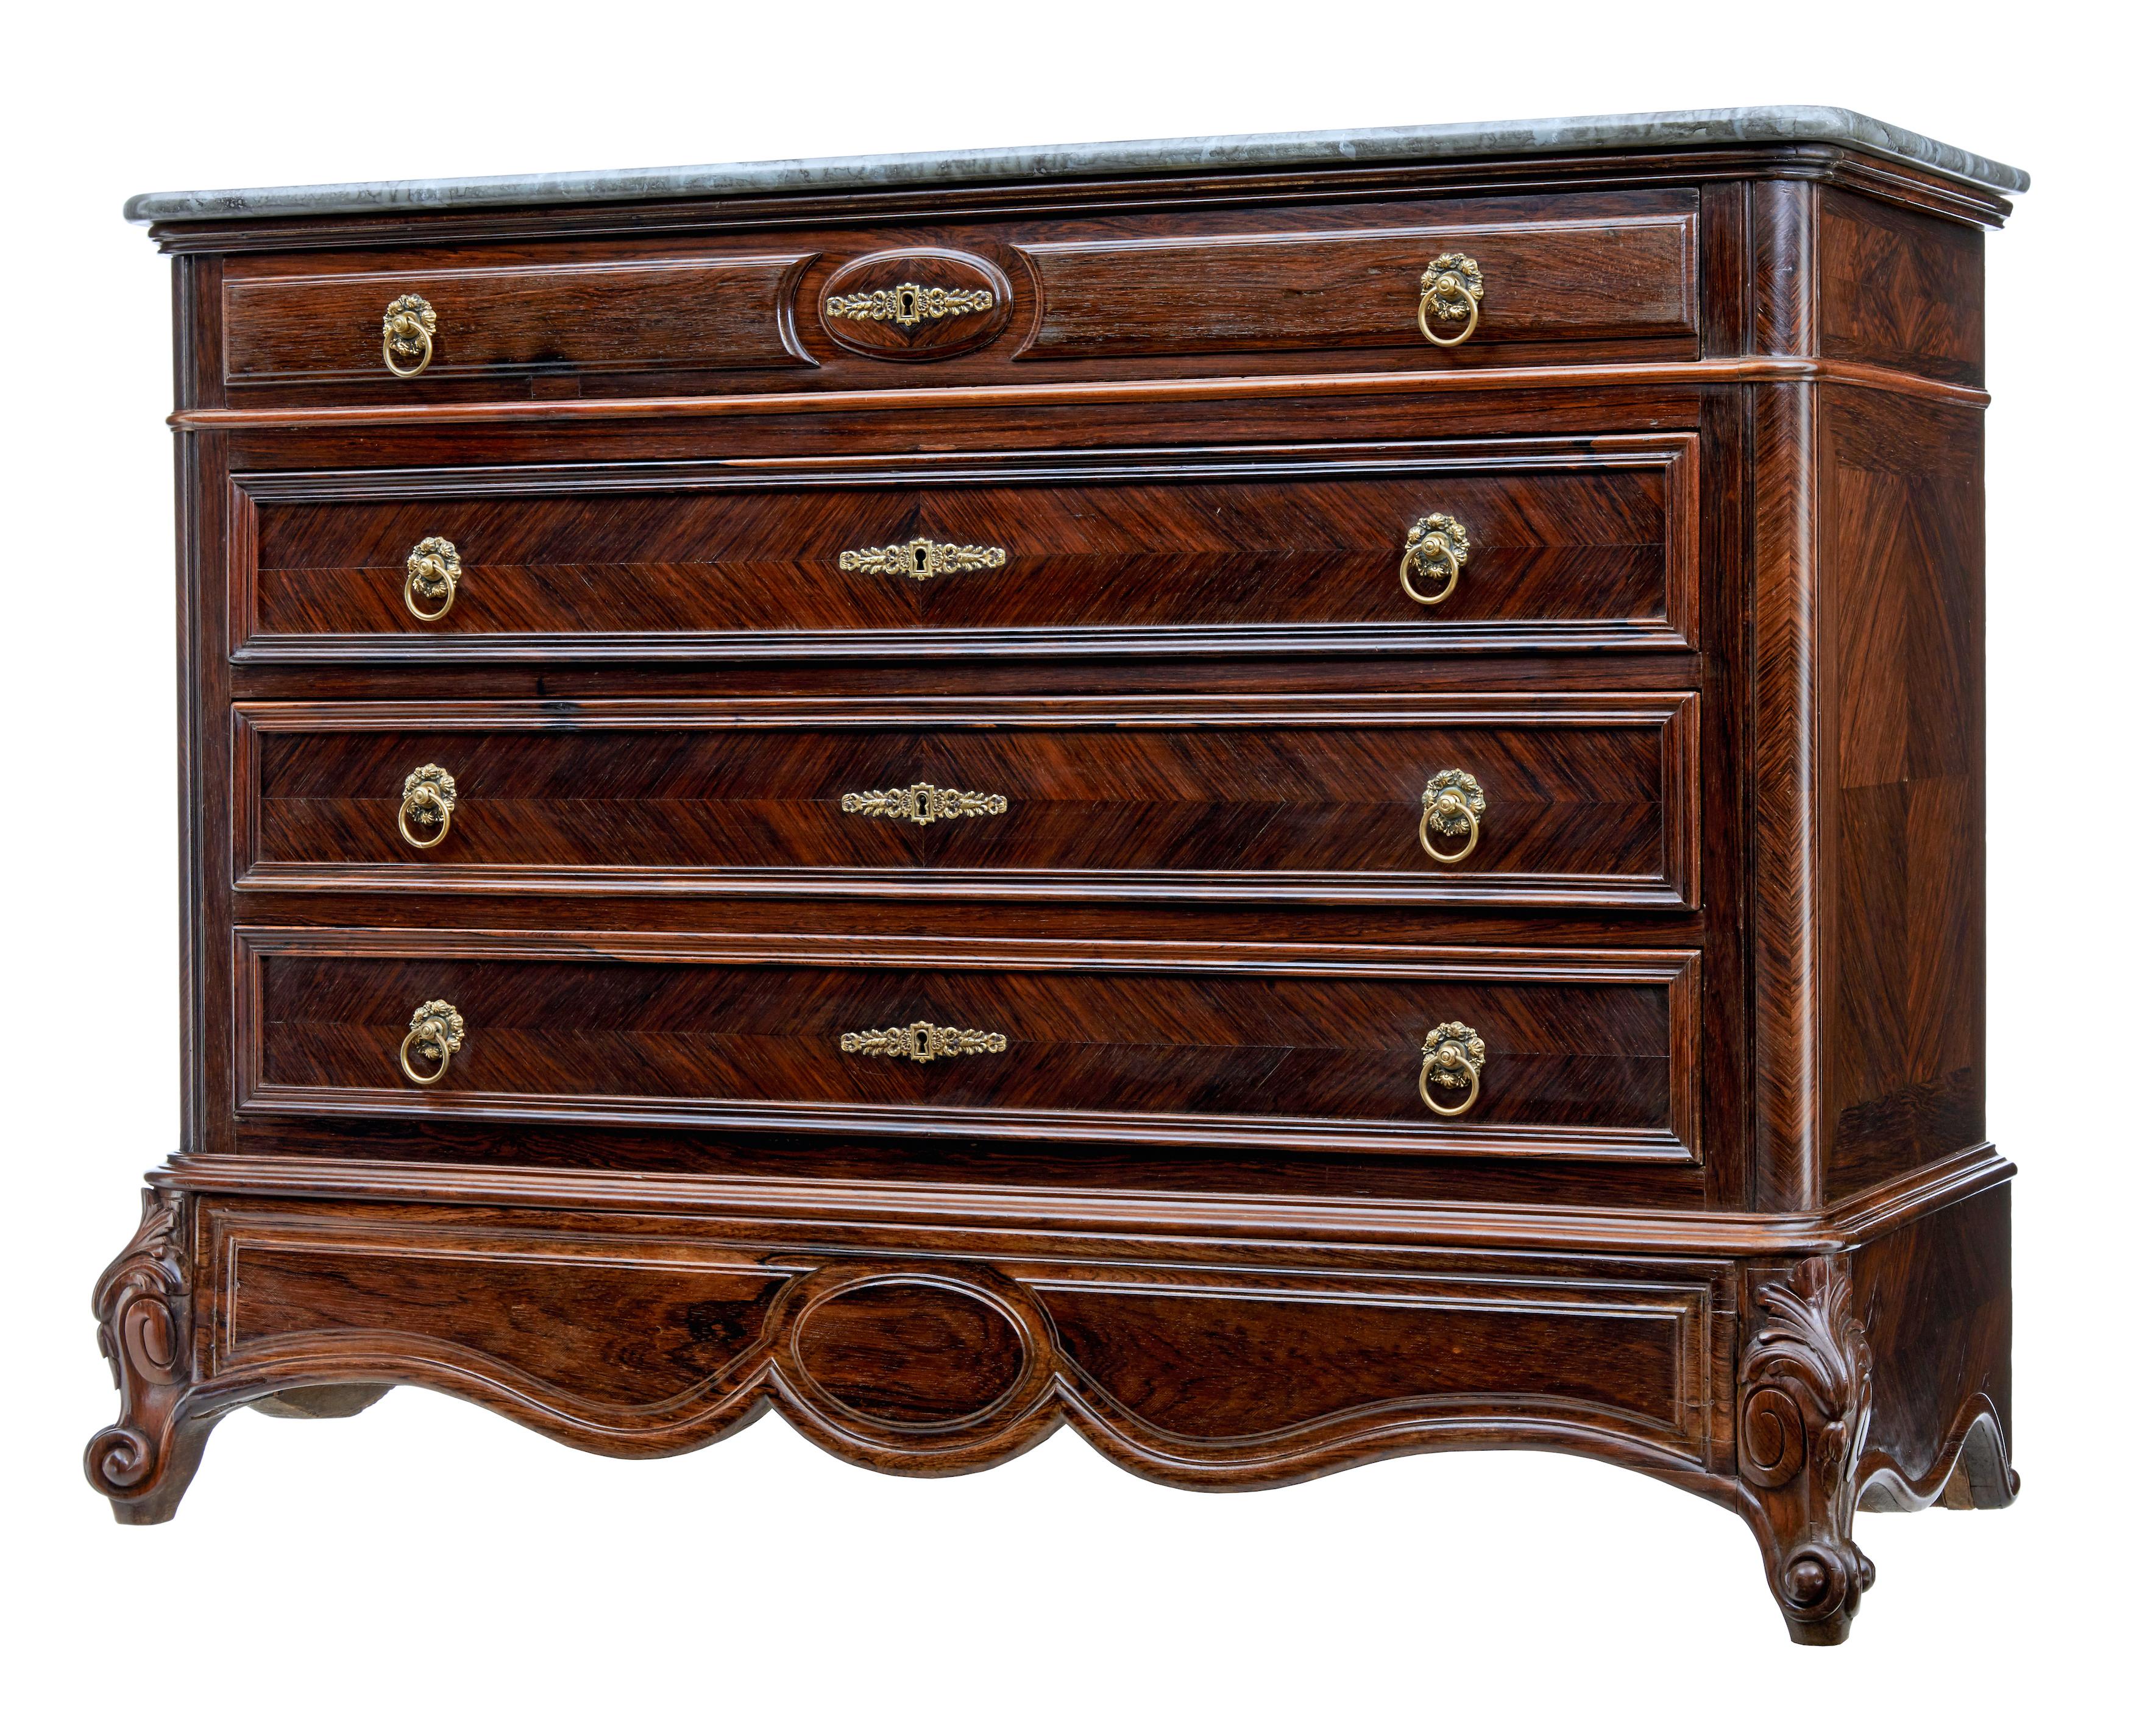 19th century French palisander chest of drawers with faux marble top circa 1870.

Stunning french commode of grand proportions beautifully veneered in palisander from the rosewood family.

Fitted with 4 drawer's of equal proportions, decorated with